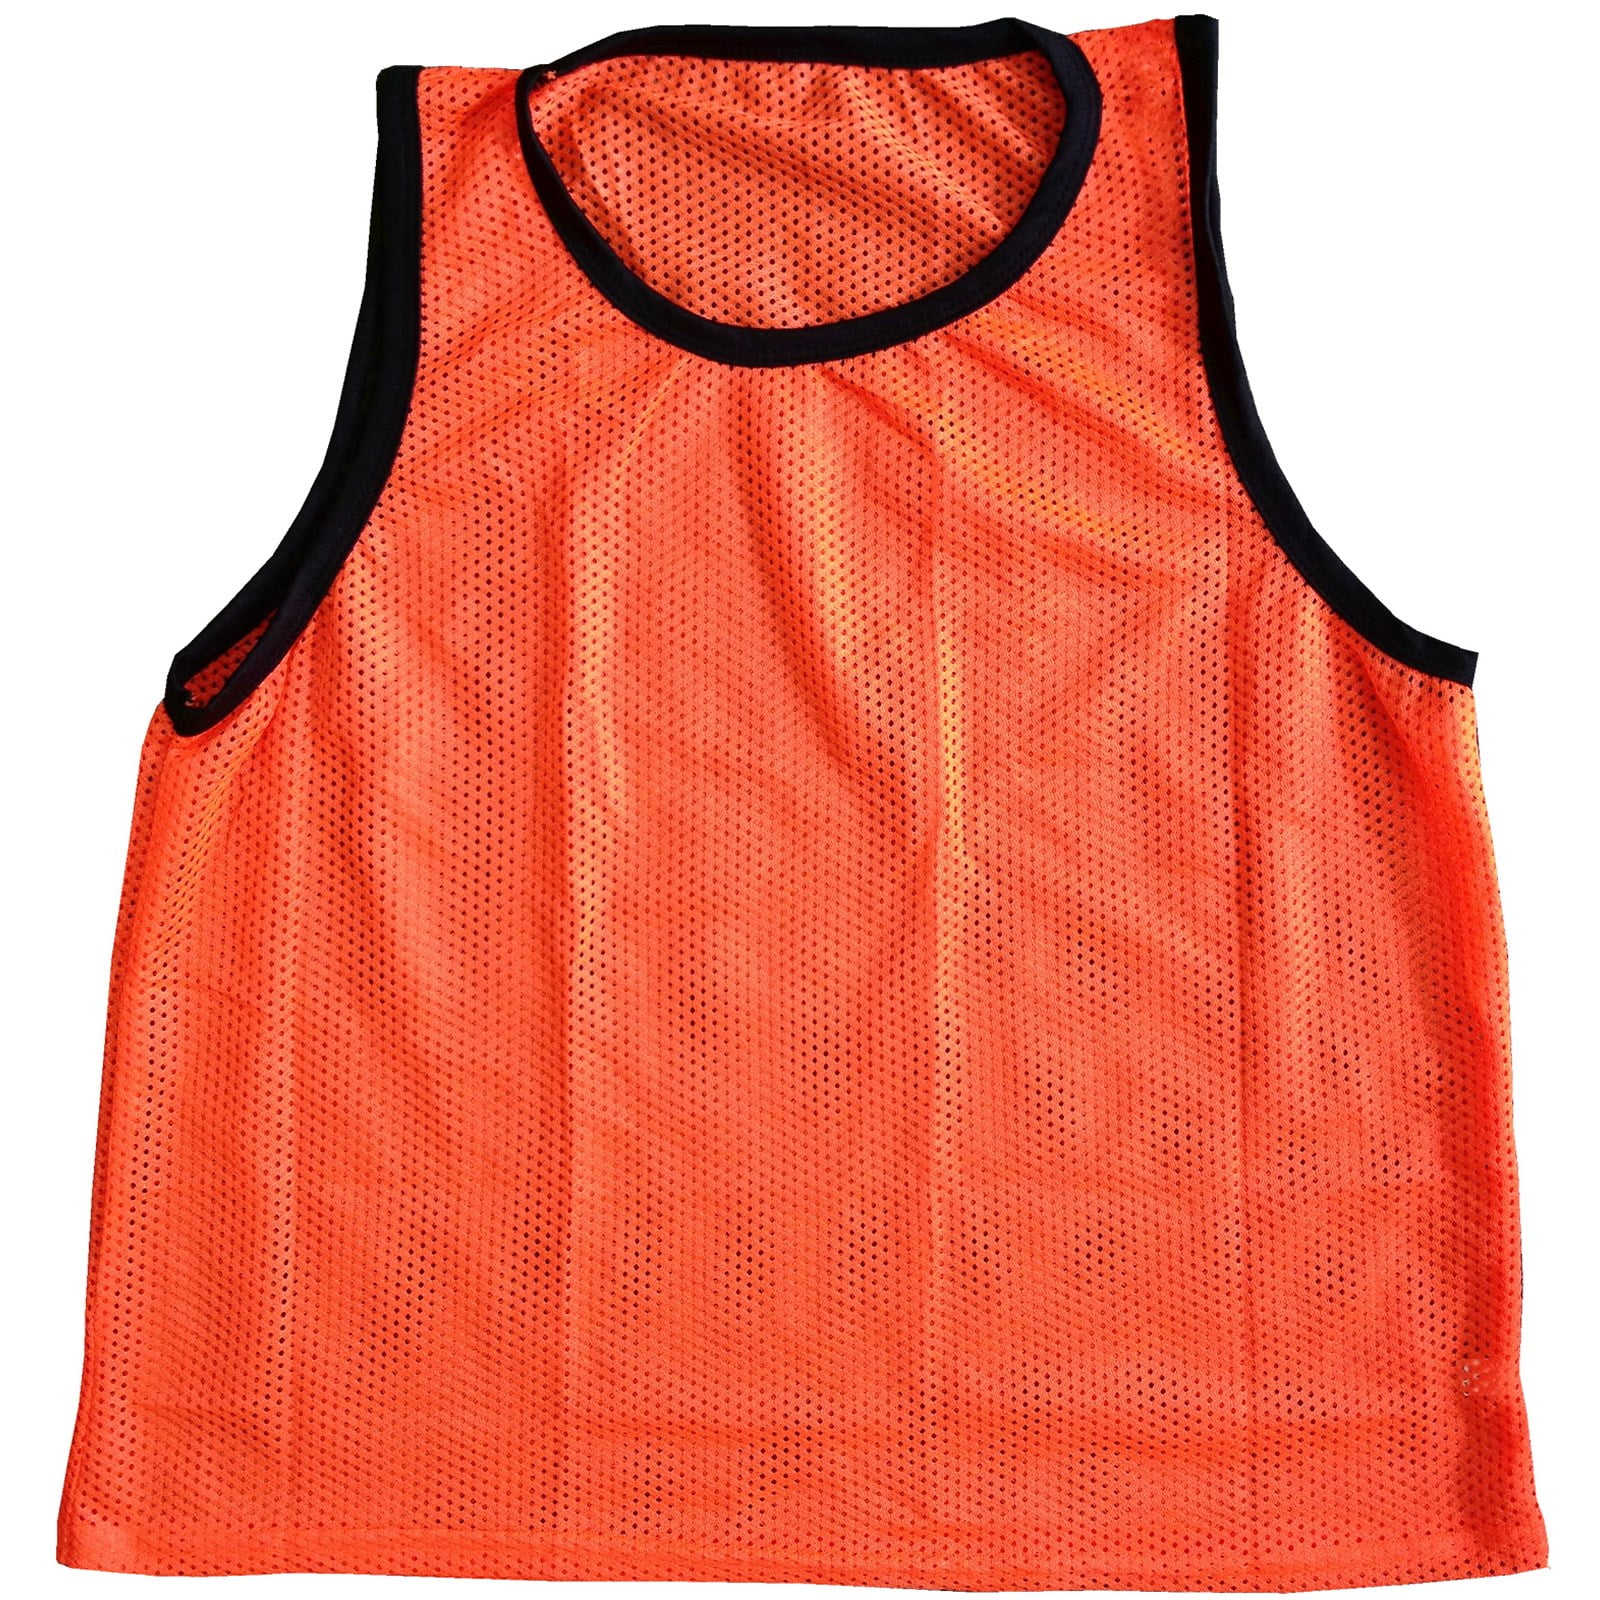 CHEAP SOCCER PINNIES MESH BIBS WORKOUTZ YOUTH SCRIMMAGE VESTS RED 6 QTY 